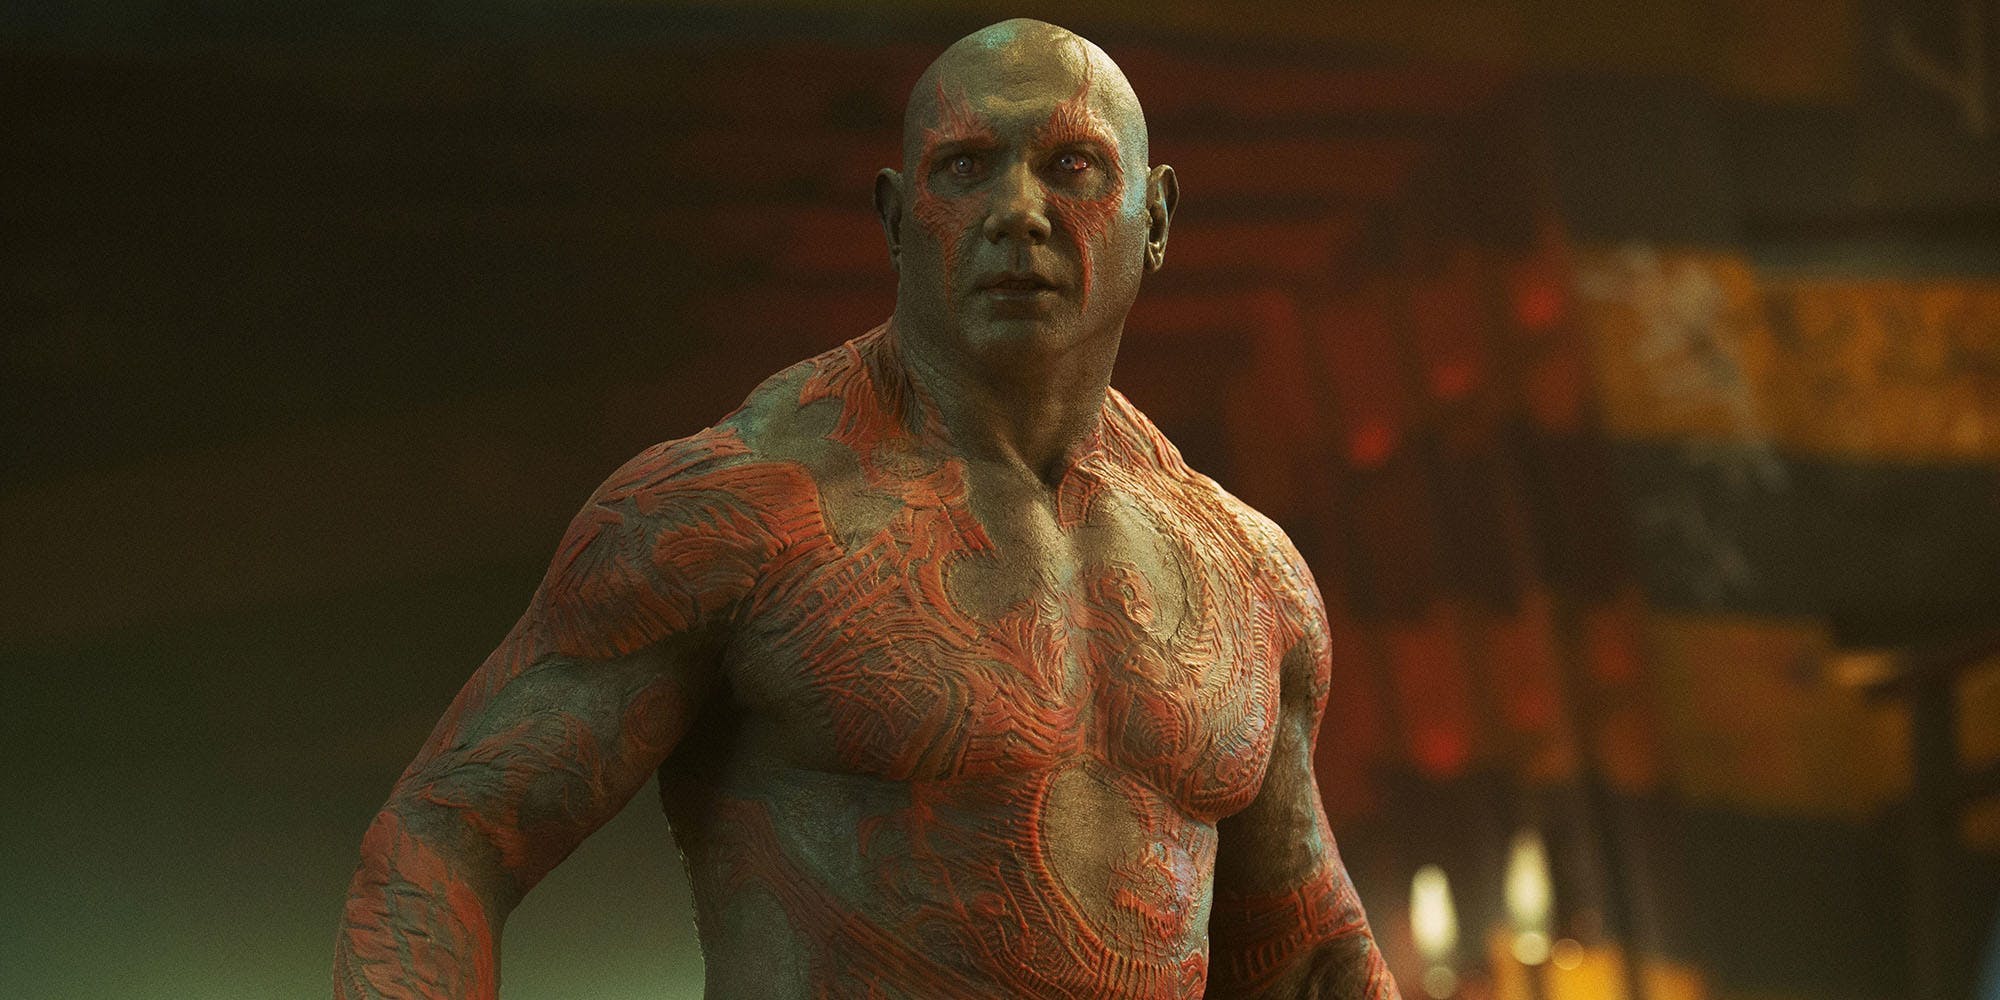 Dave Bautista as Drax in Guardians of the